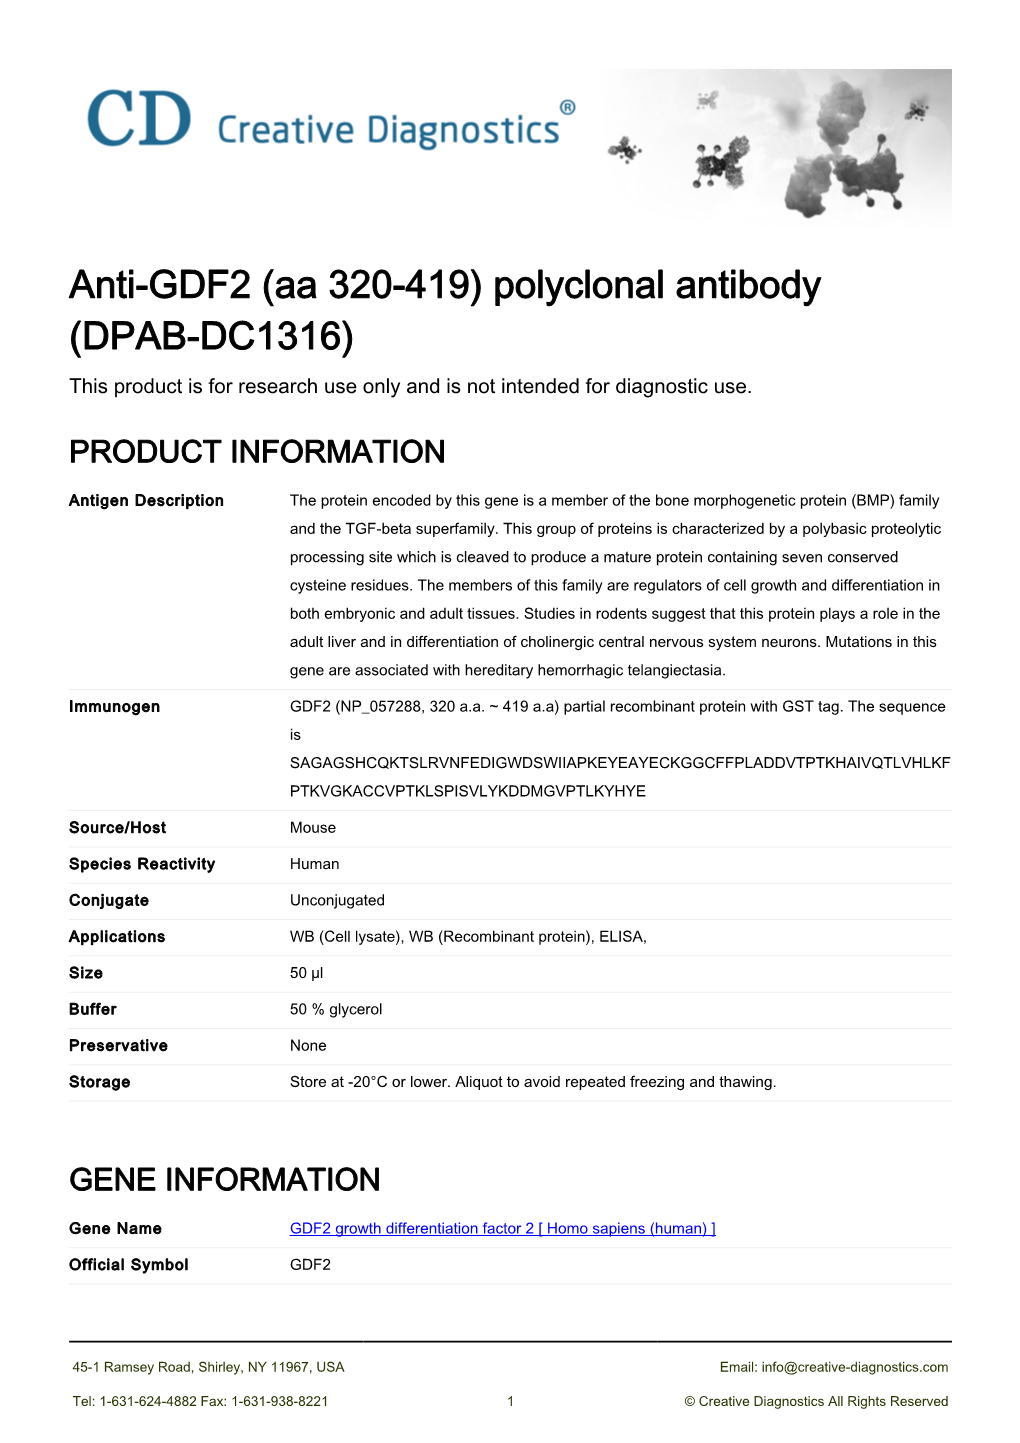 Anti-GDF2 (Aa 320-419) Polyclonal Antibody (DPAB-DC1316) This Product Is for Research Use Only and Is Not Intended for Diagnostic Use